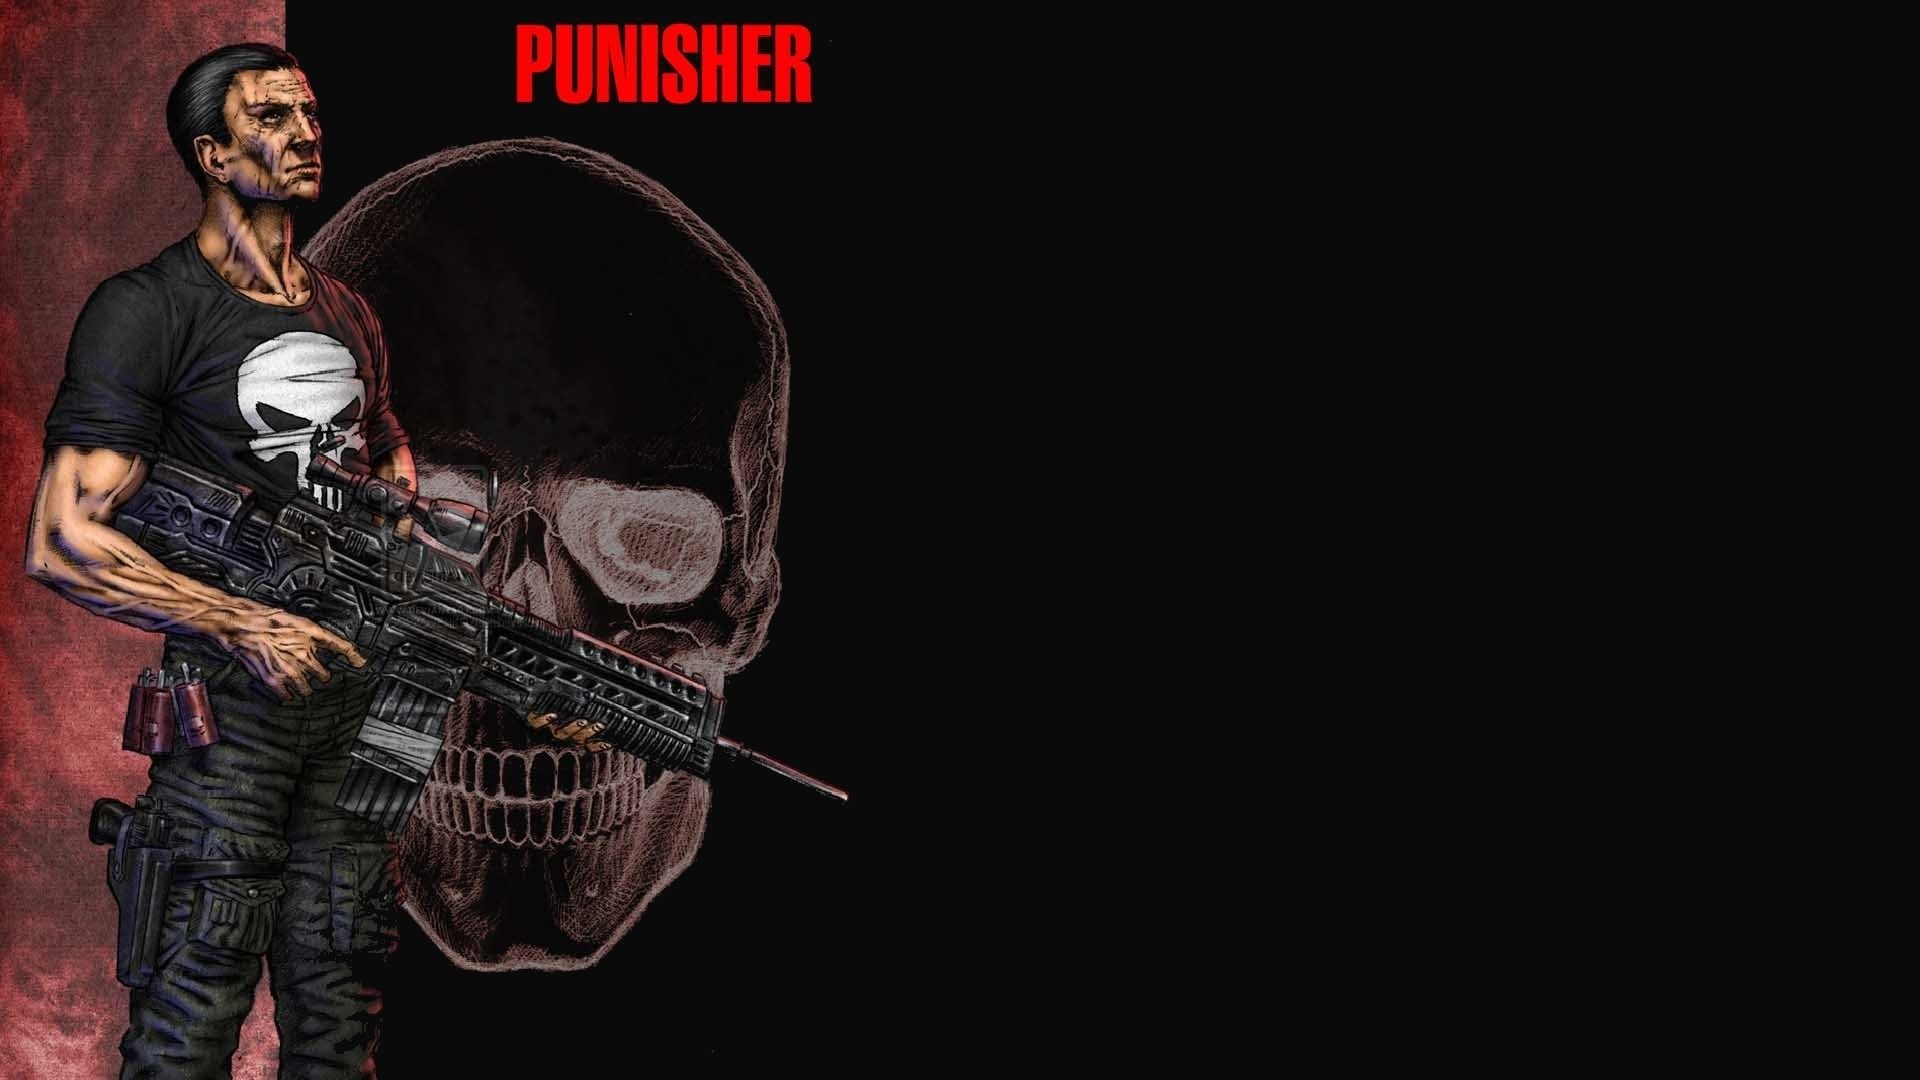 1920x1080 Punisher HD Wallpapers Backgrounds Wallpaper